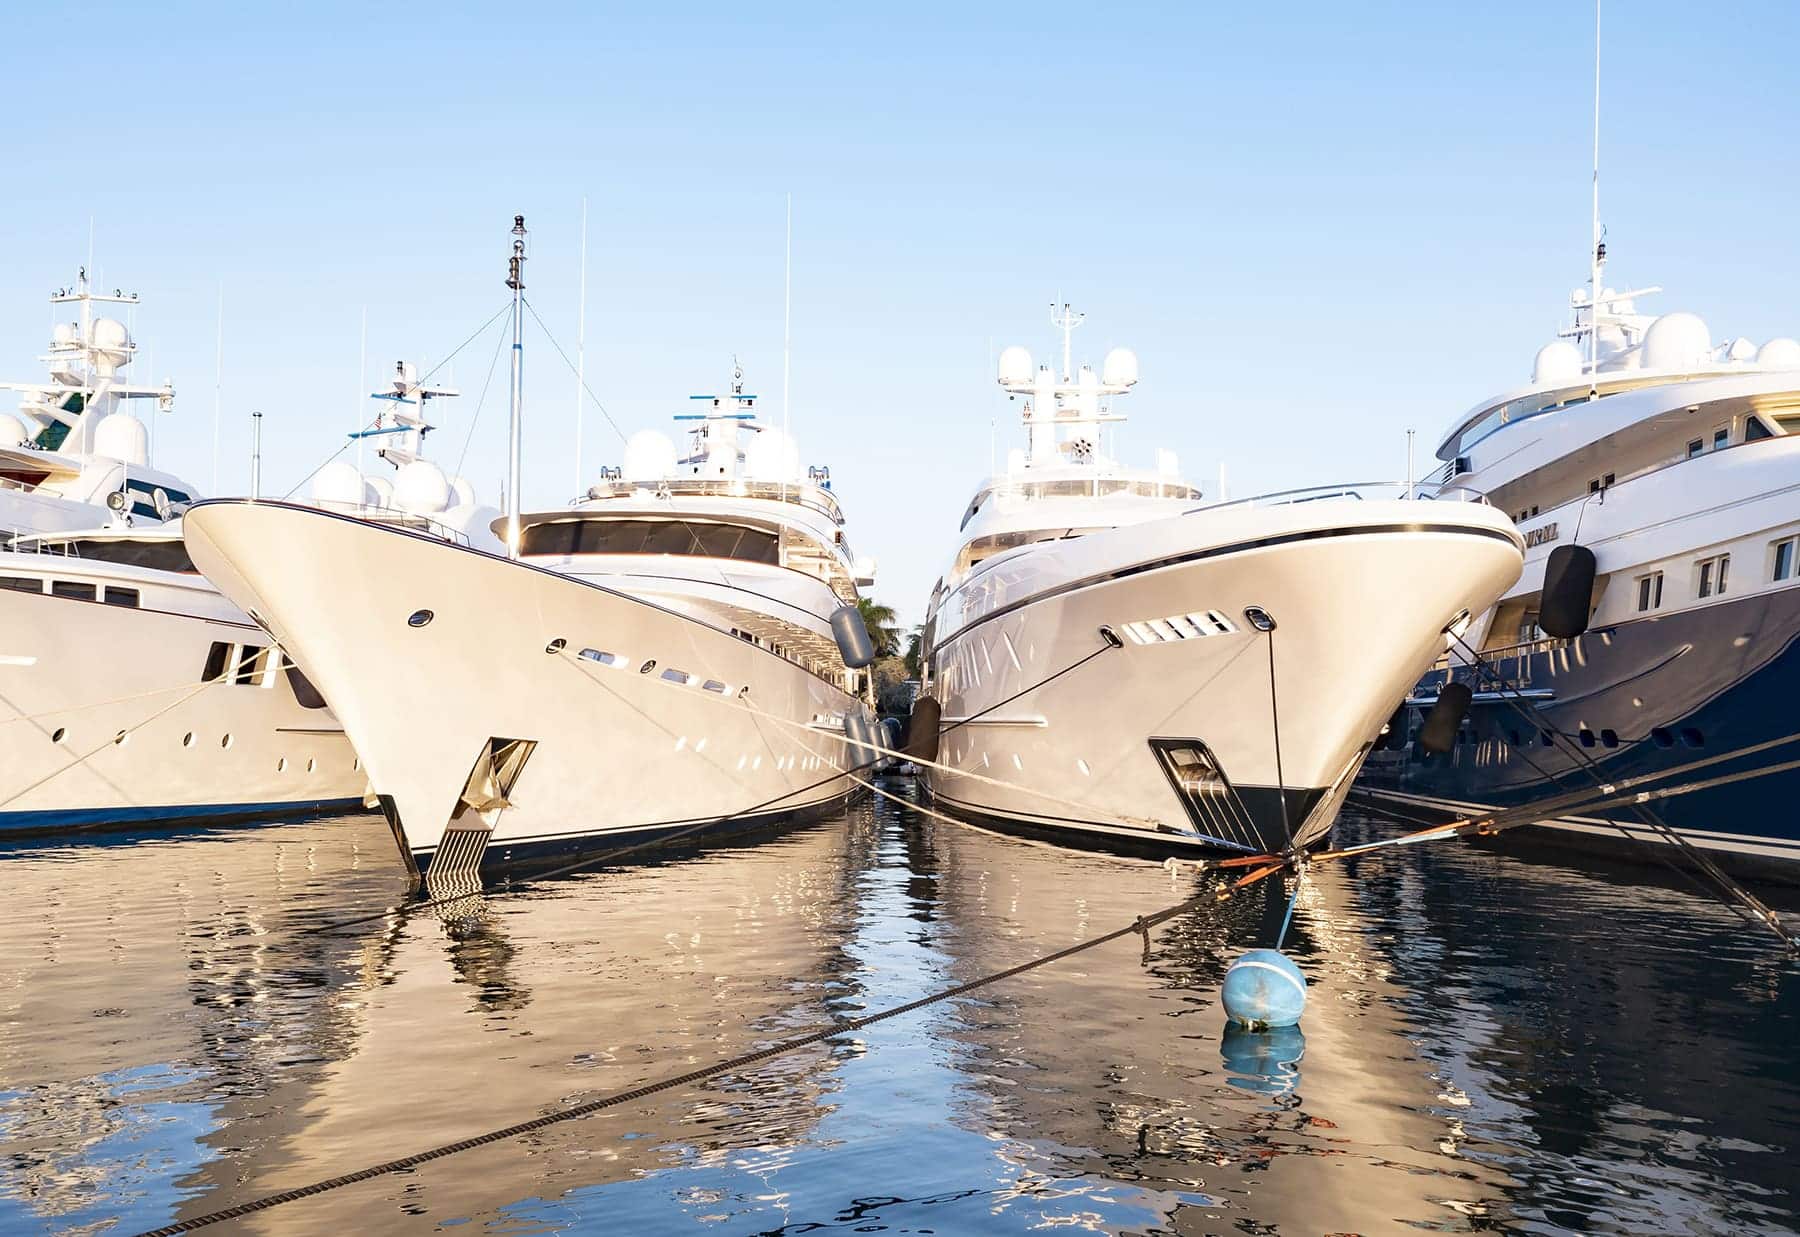 yachts docked next to each other